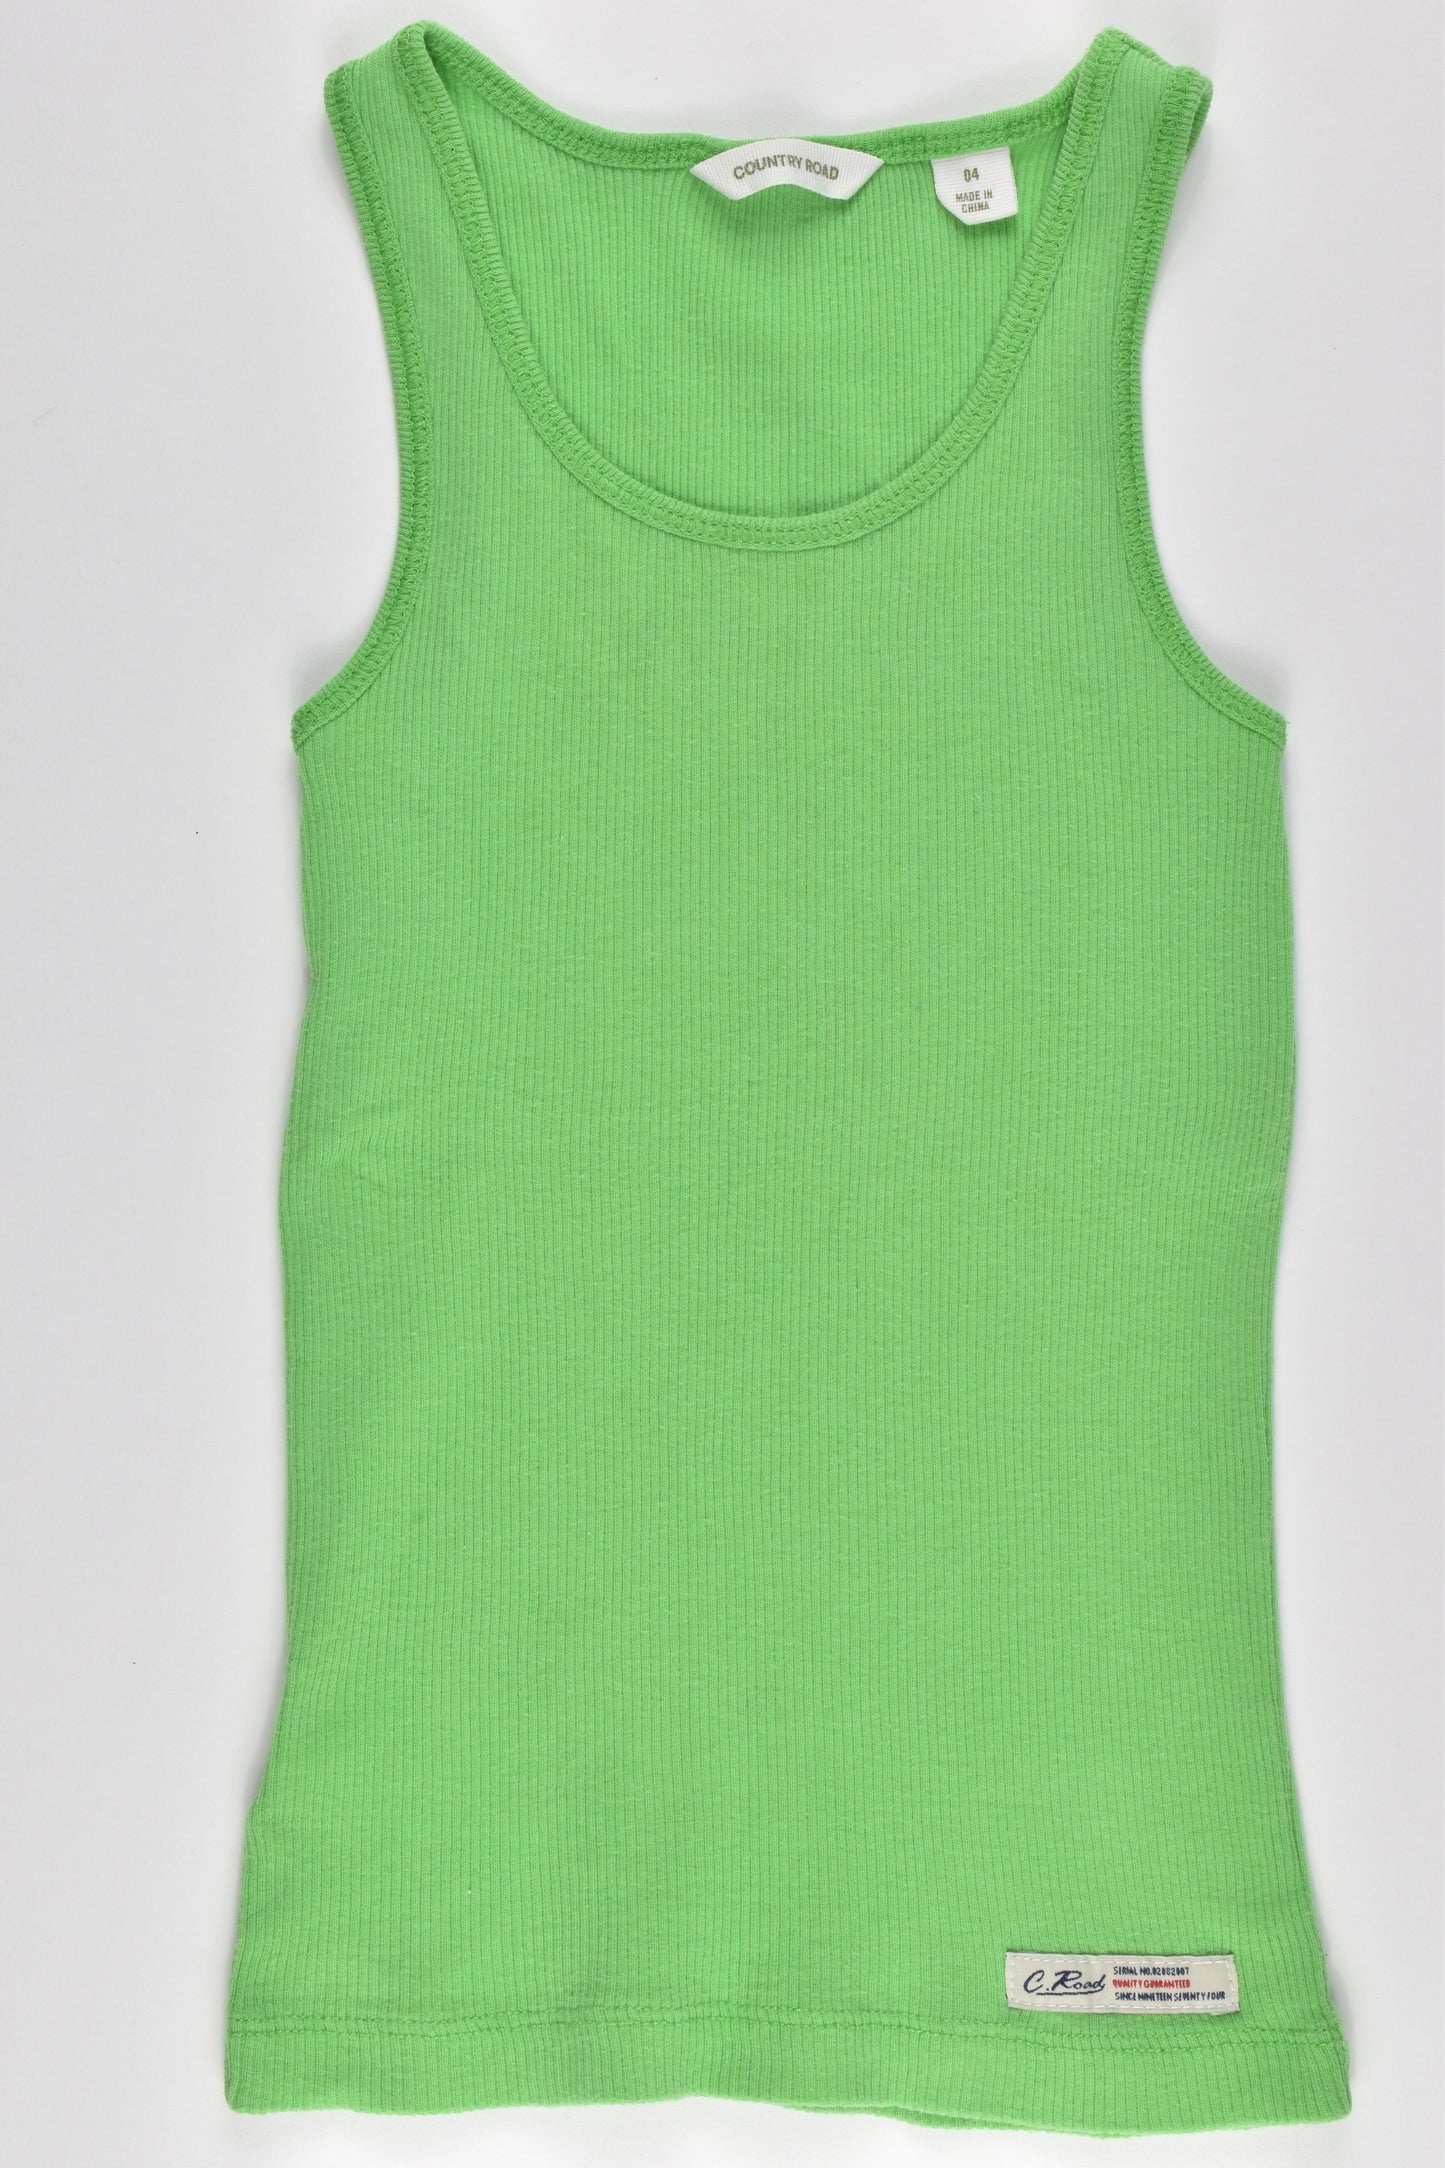 Country road Size 4 Ribbed Tank Top